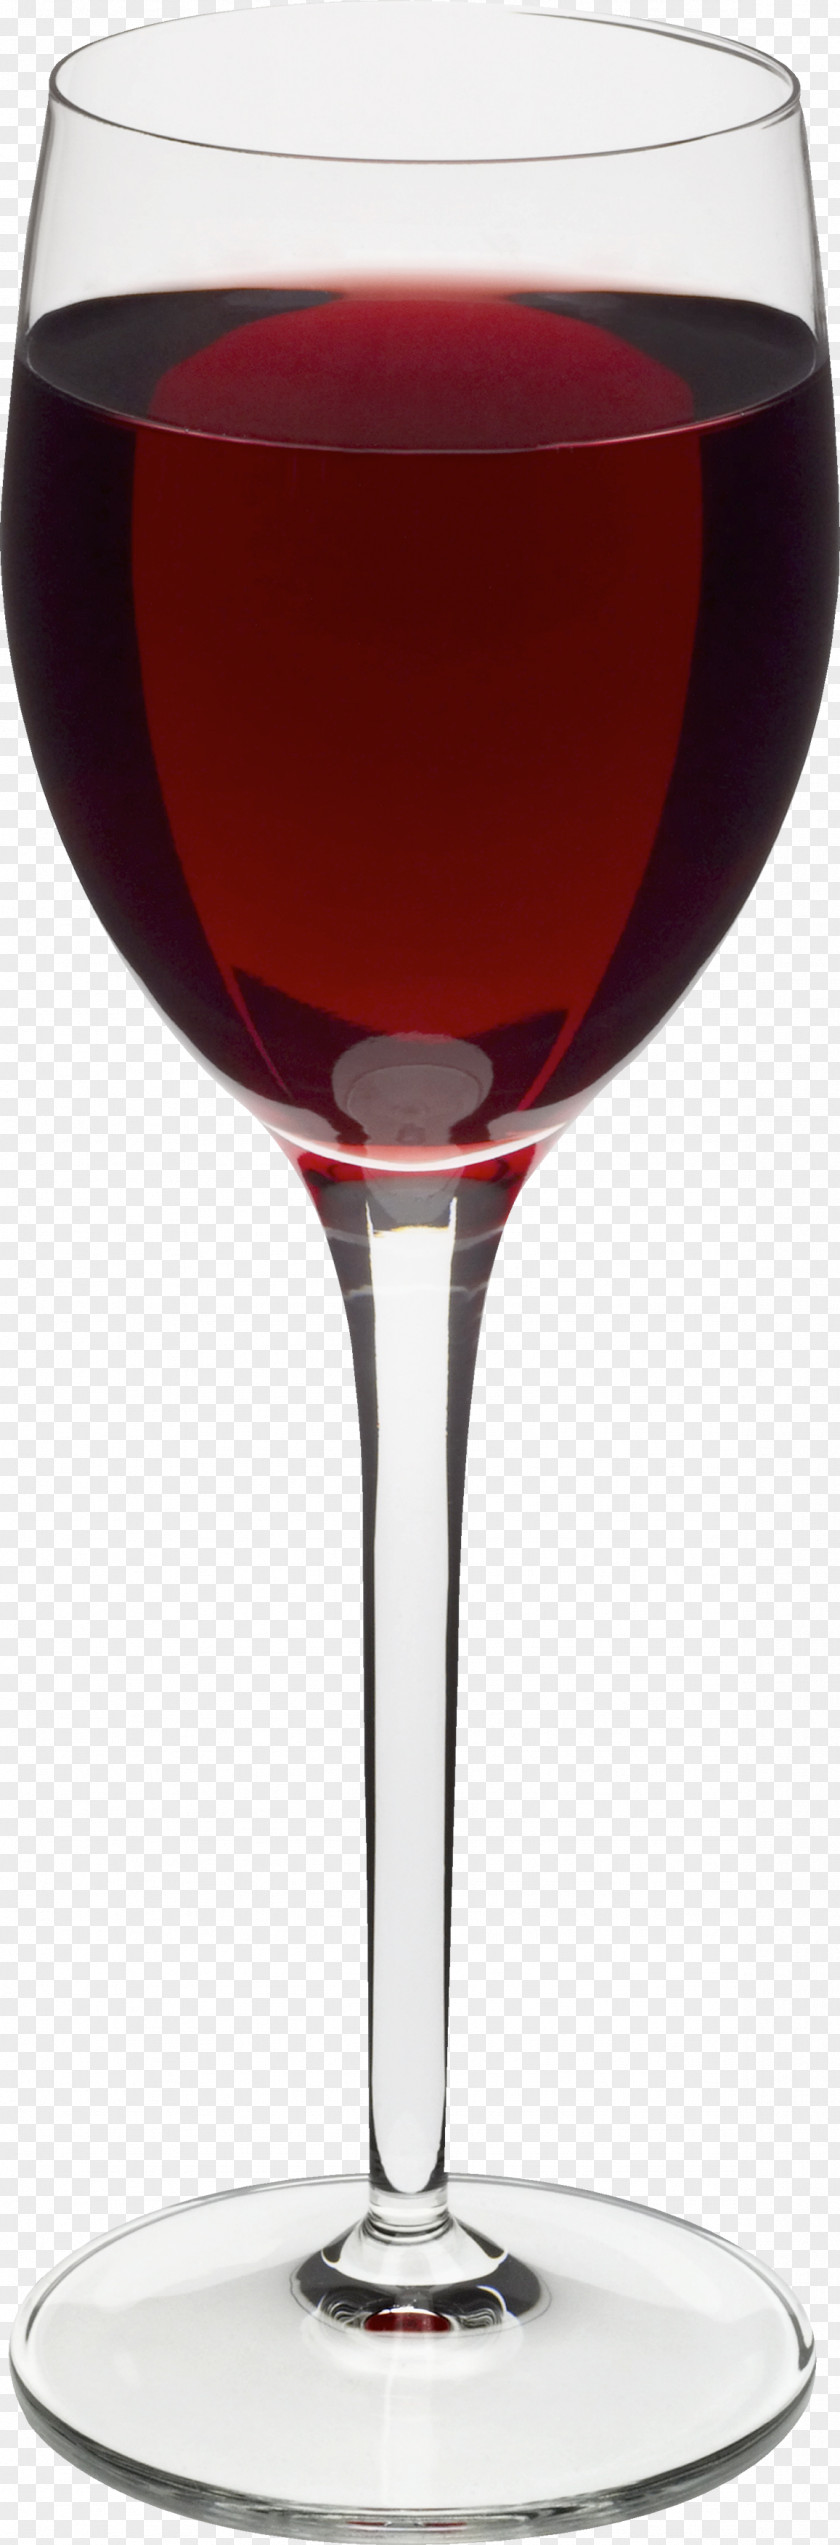 Wine Glass Image Computer File PNG